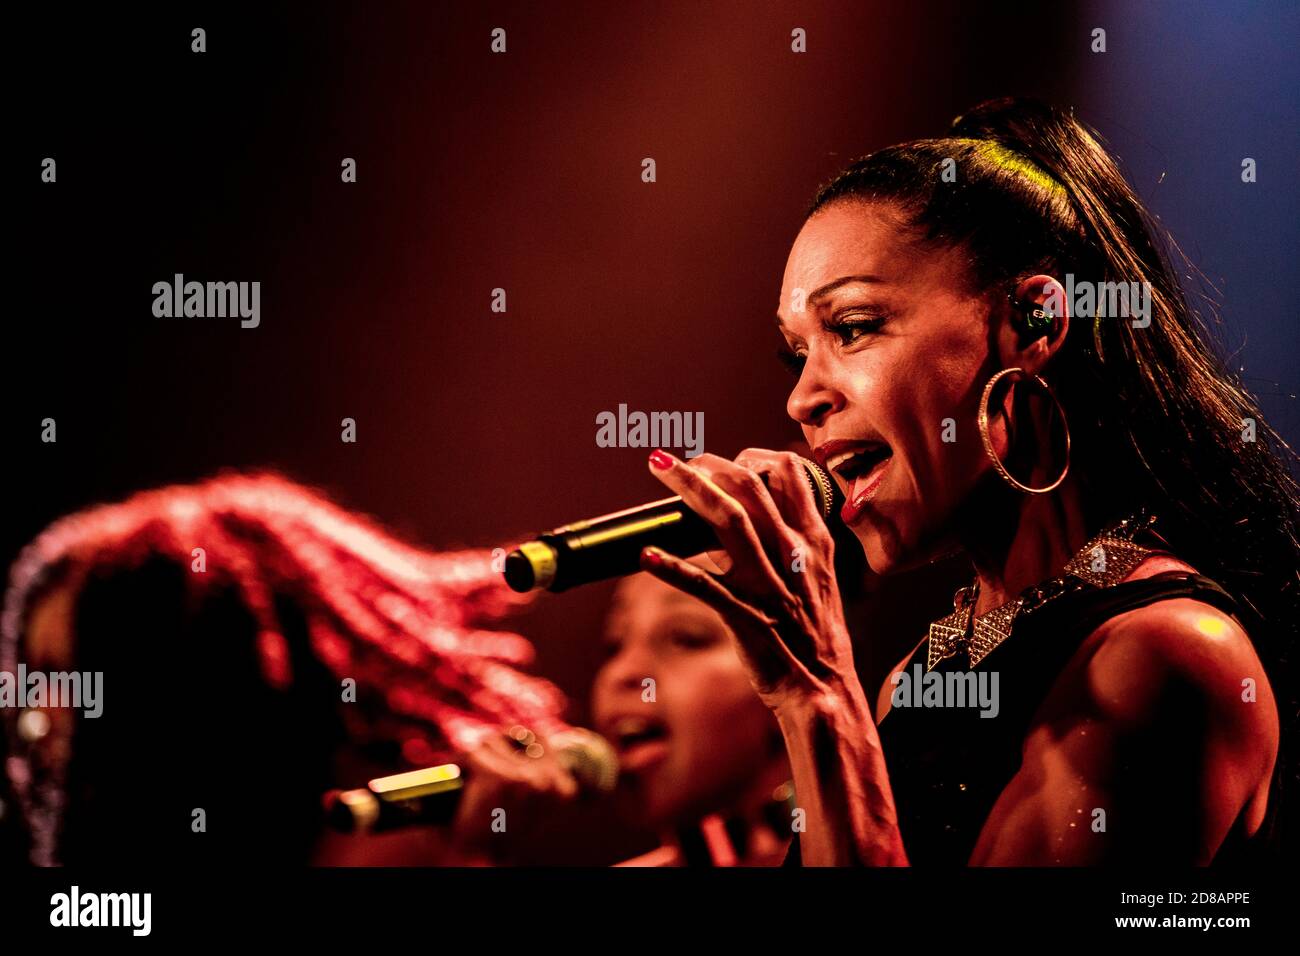 Kolding, Denmark. 04th, March 2016. The American R&B and vocal group En Vogue performs a live concert at Godset in Kolding. (Photo credit: Gonzales Photo - Lasse Lagoni). Stock Photo